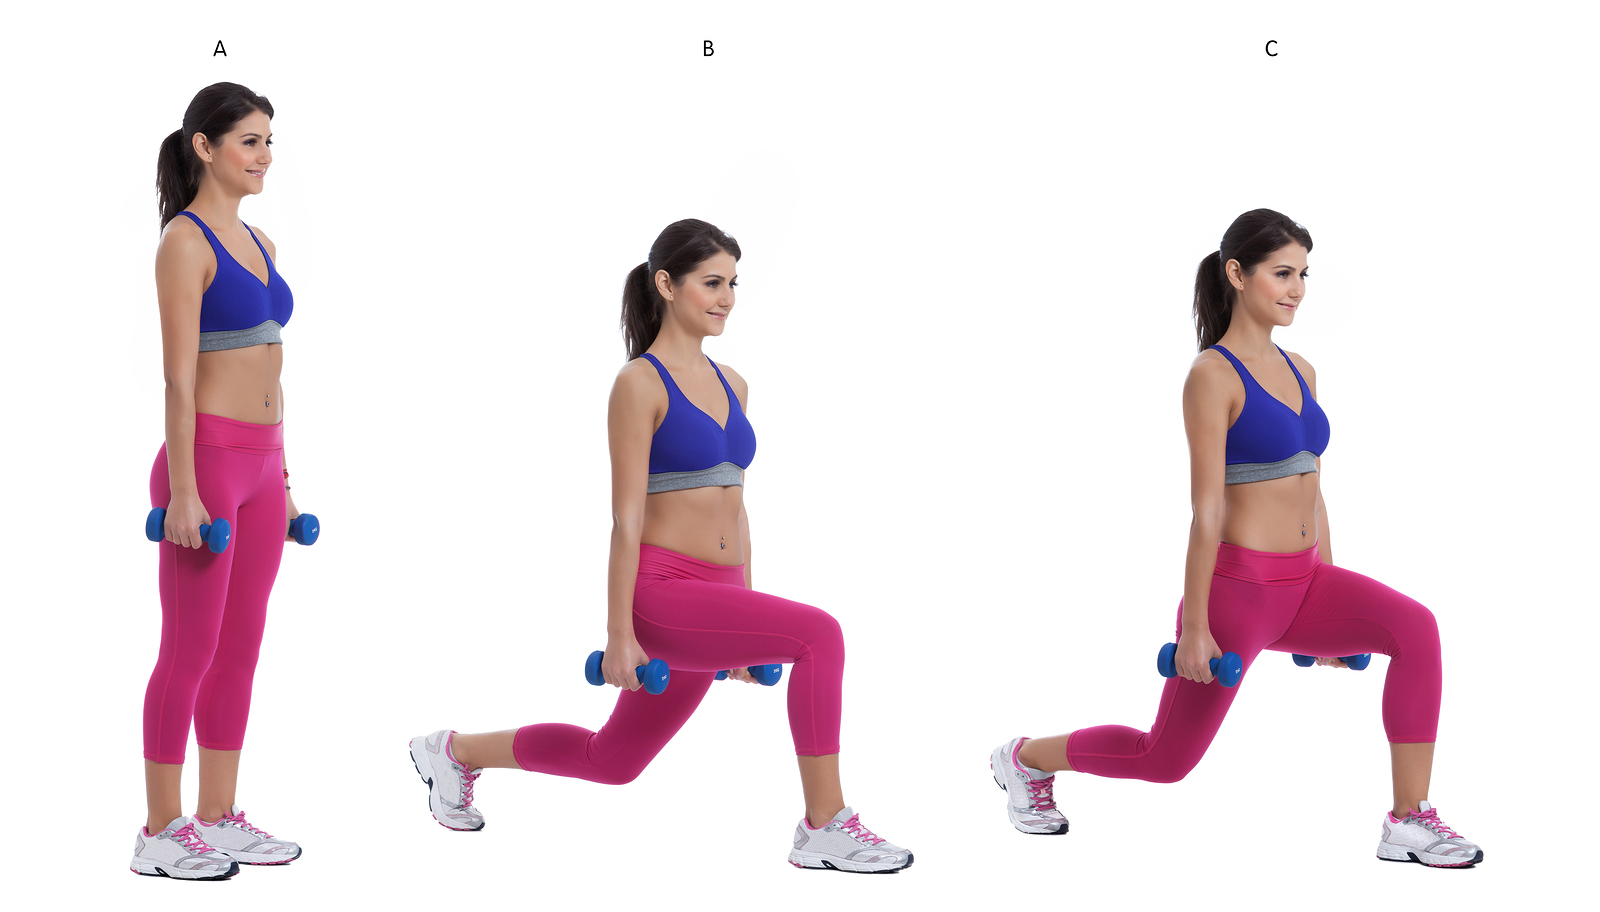 Step by step instructions: Hold a pair of dumbbells at arm's length next to your sides your palms facing each other. Stand tall with your feet hip-width apart and brace your core. (A) Step backward with your left leg. Then lower your body into a lunge.